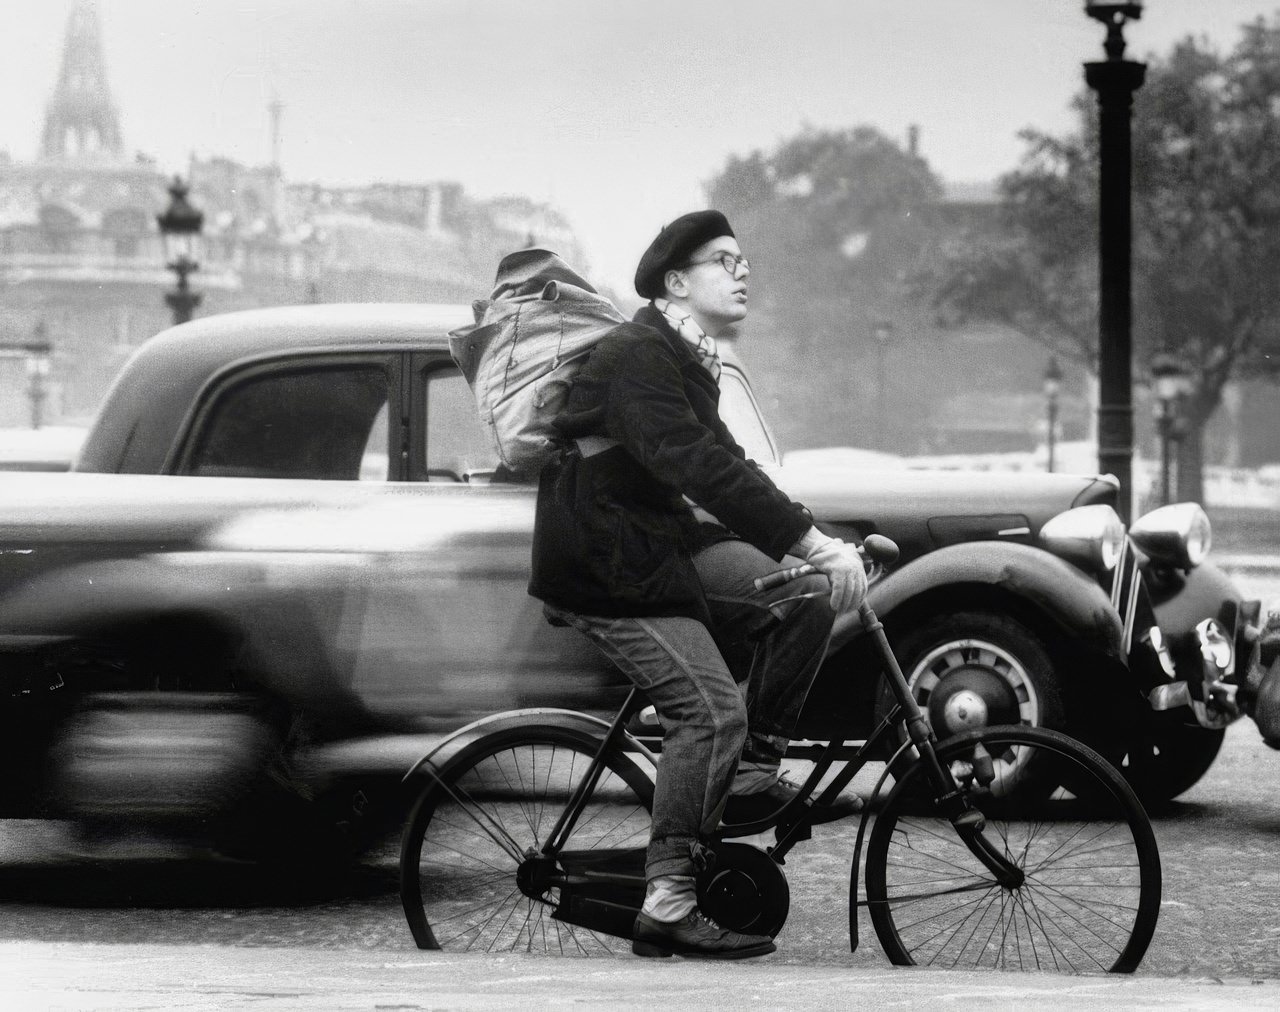 French look gives Ed Perregaux, from Connecticut the reputation of being "a character." He wears a beret and pack, rides a bike which he bought at the Flea Market.